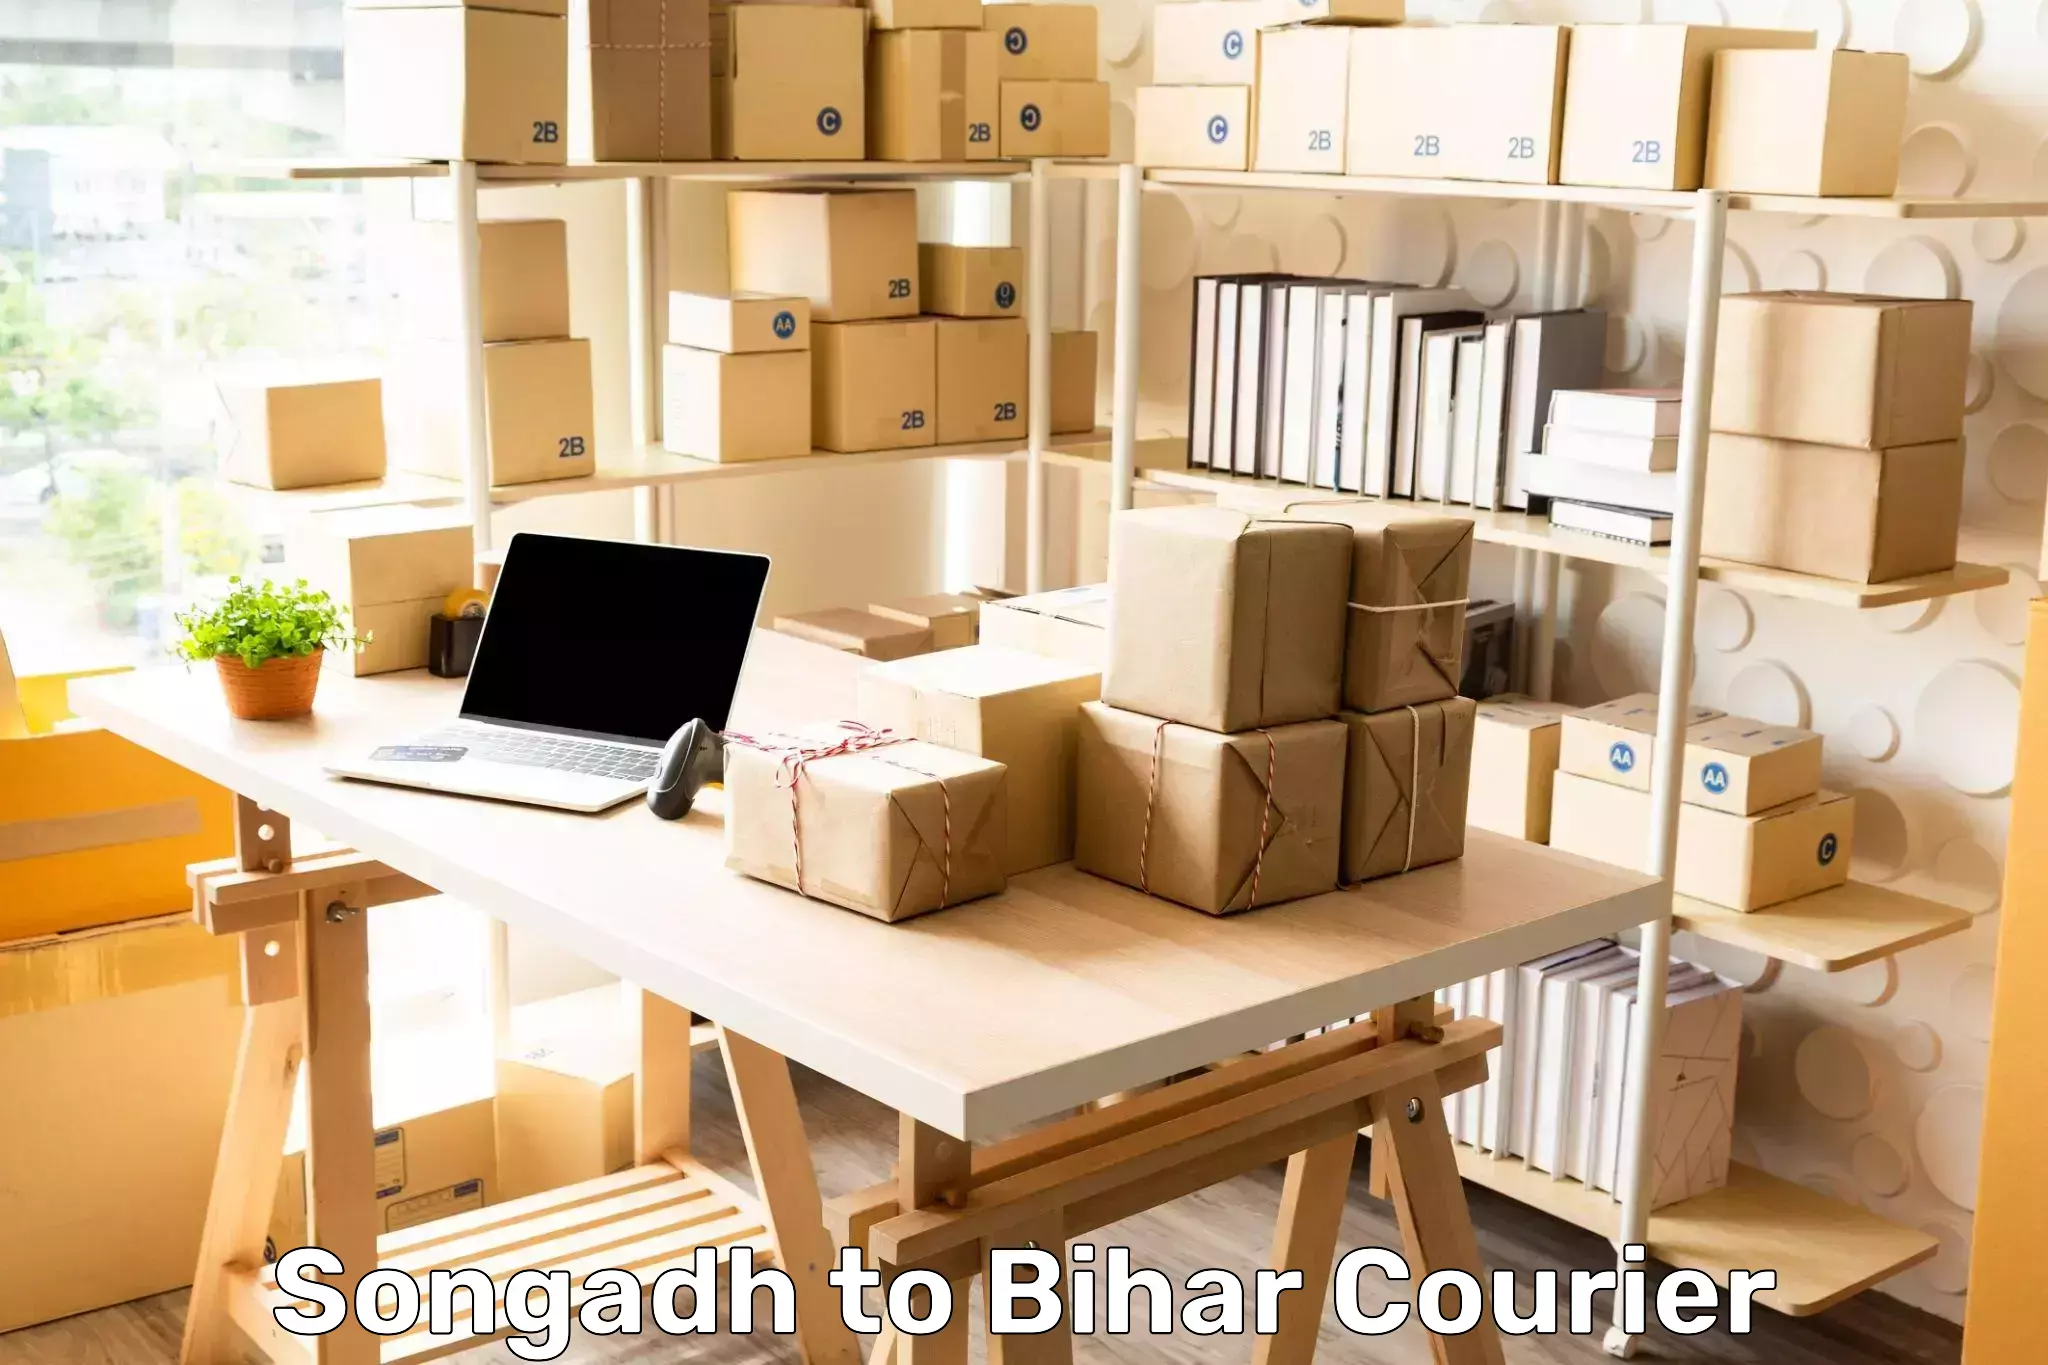 Sustainable courier practices Songadh to Bihar